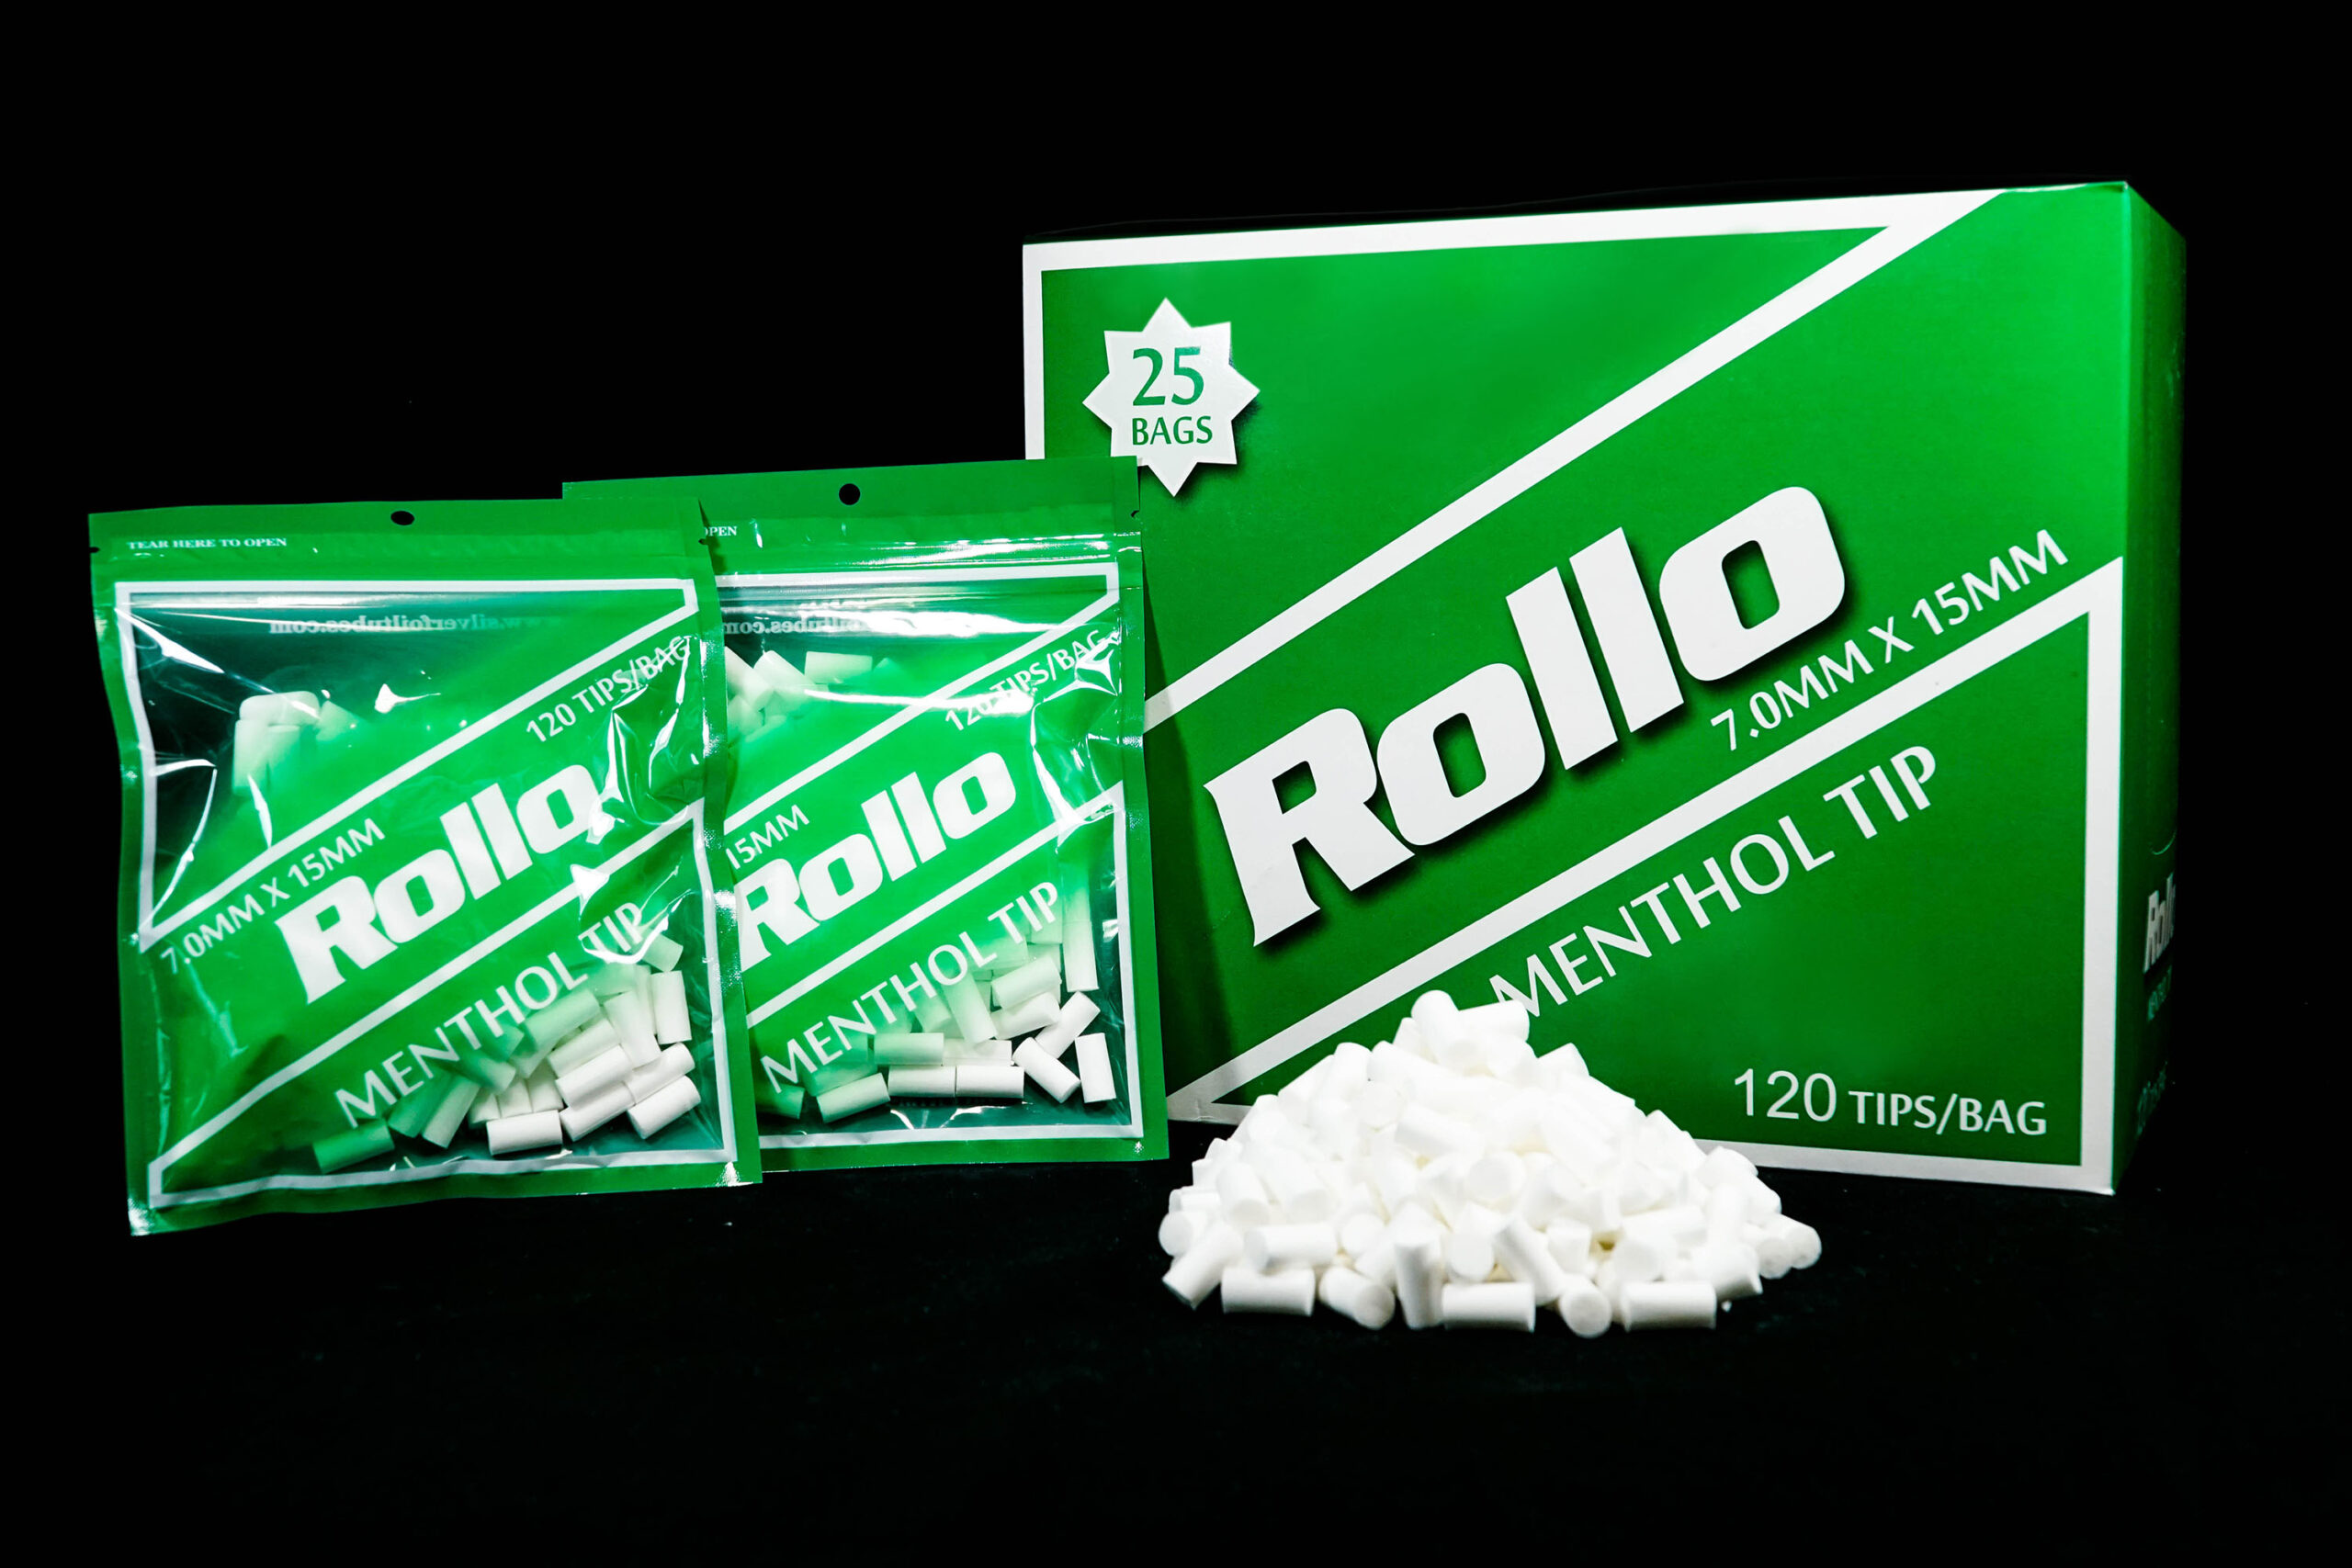 https://www.silverfoiltubes.com/wp-content/uploads/2019/04/cigarette-rolling-paper-filter-tips-slim-rollo-green-7mm-x-15mm-scaled.jpg